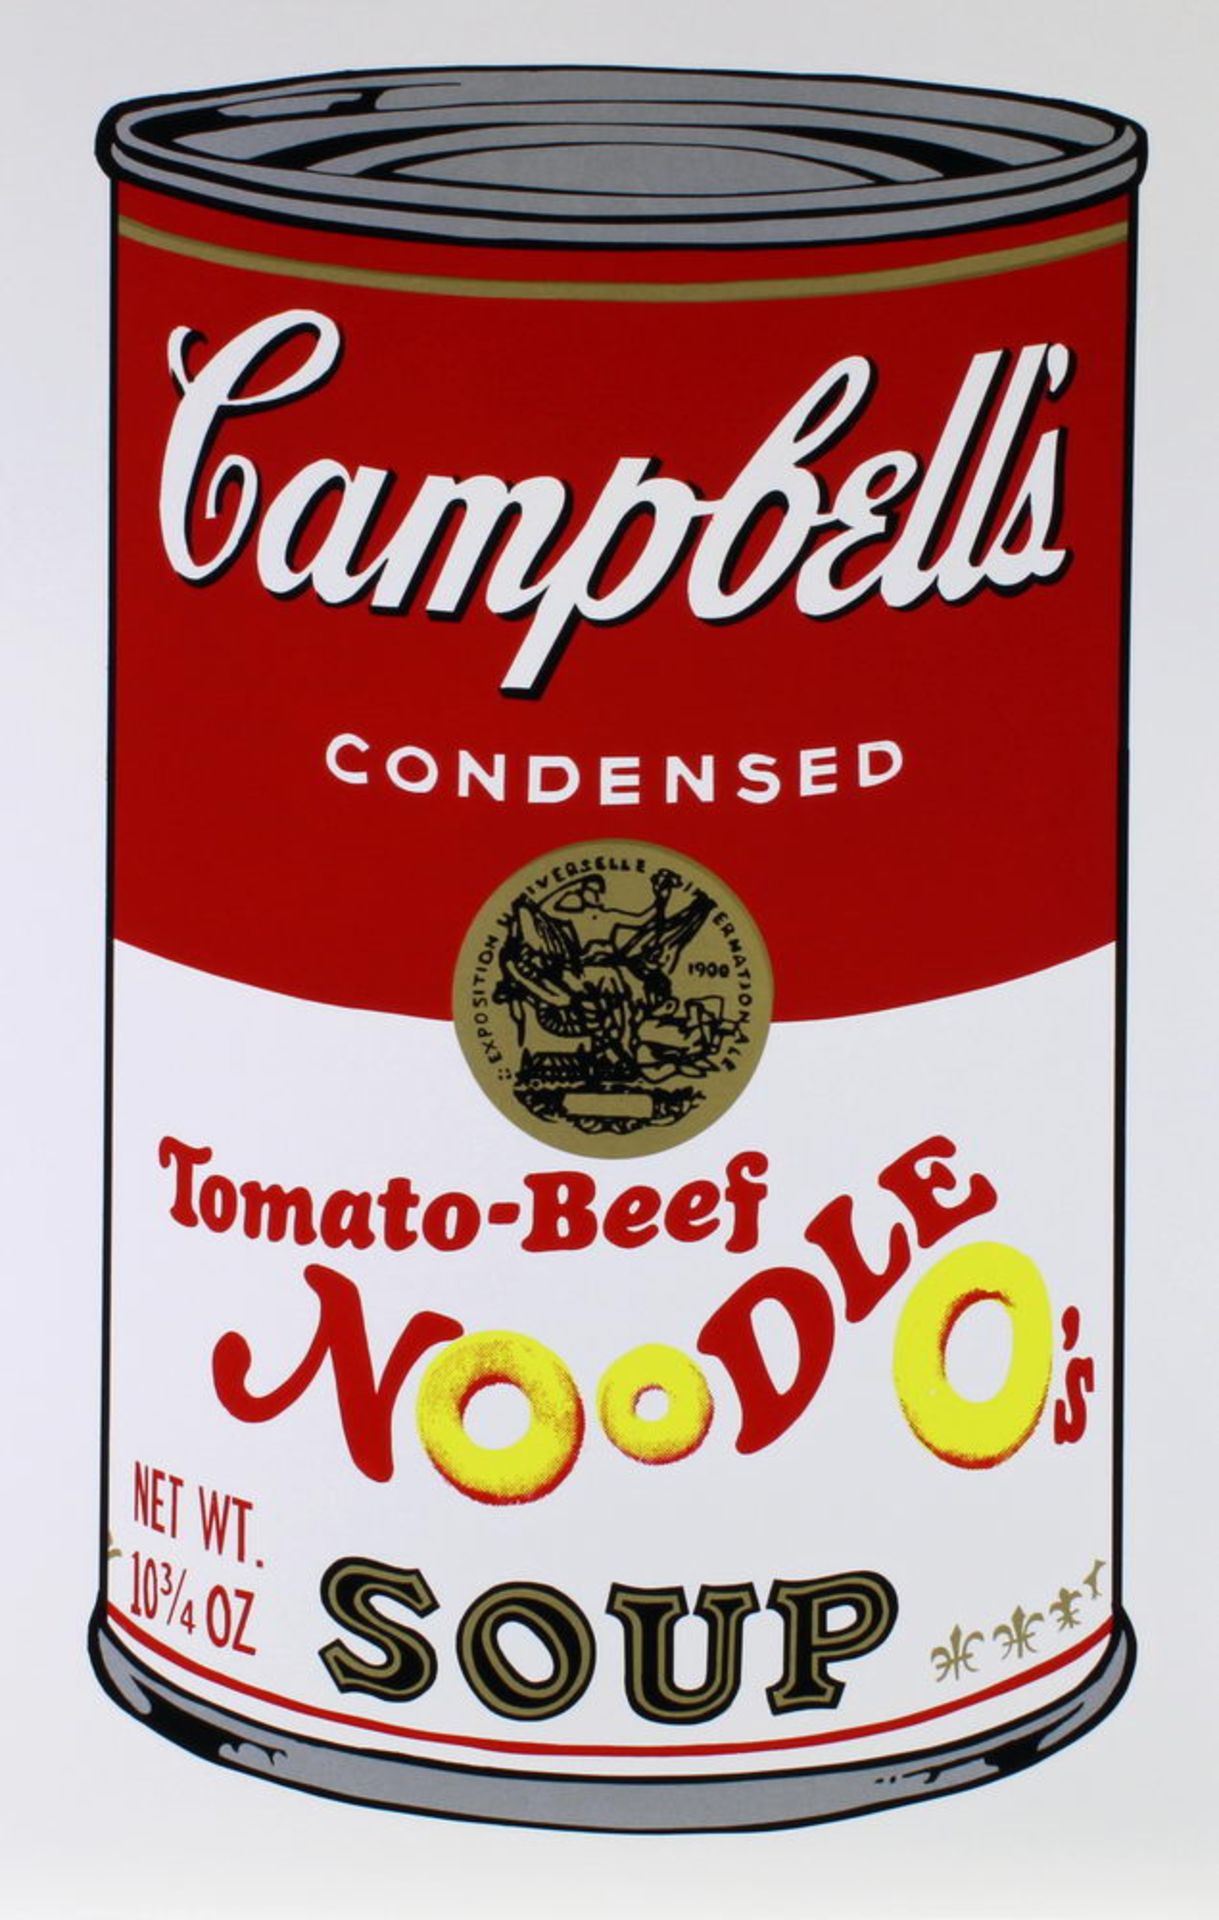 Warhol, Andy (1928 Pittsburgh - 1987 New York), 10 Farbserigrafien, "Campbell's", published by Sund